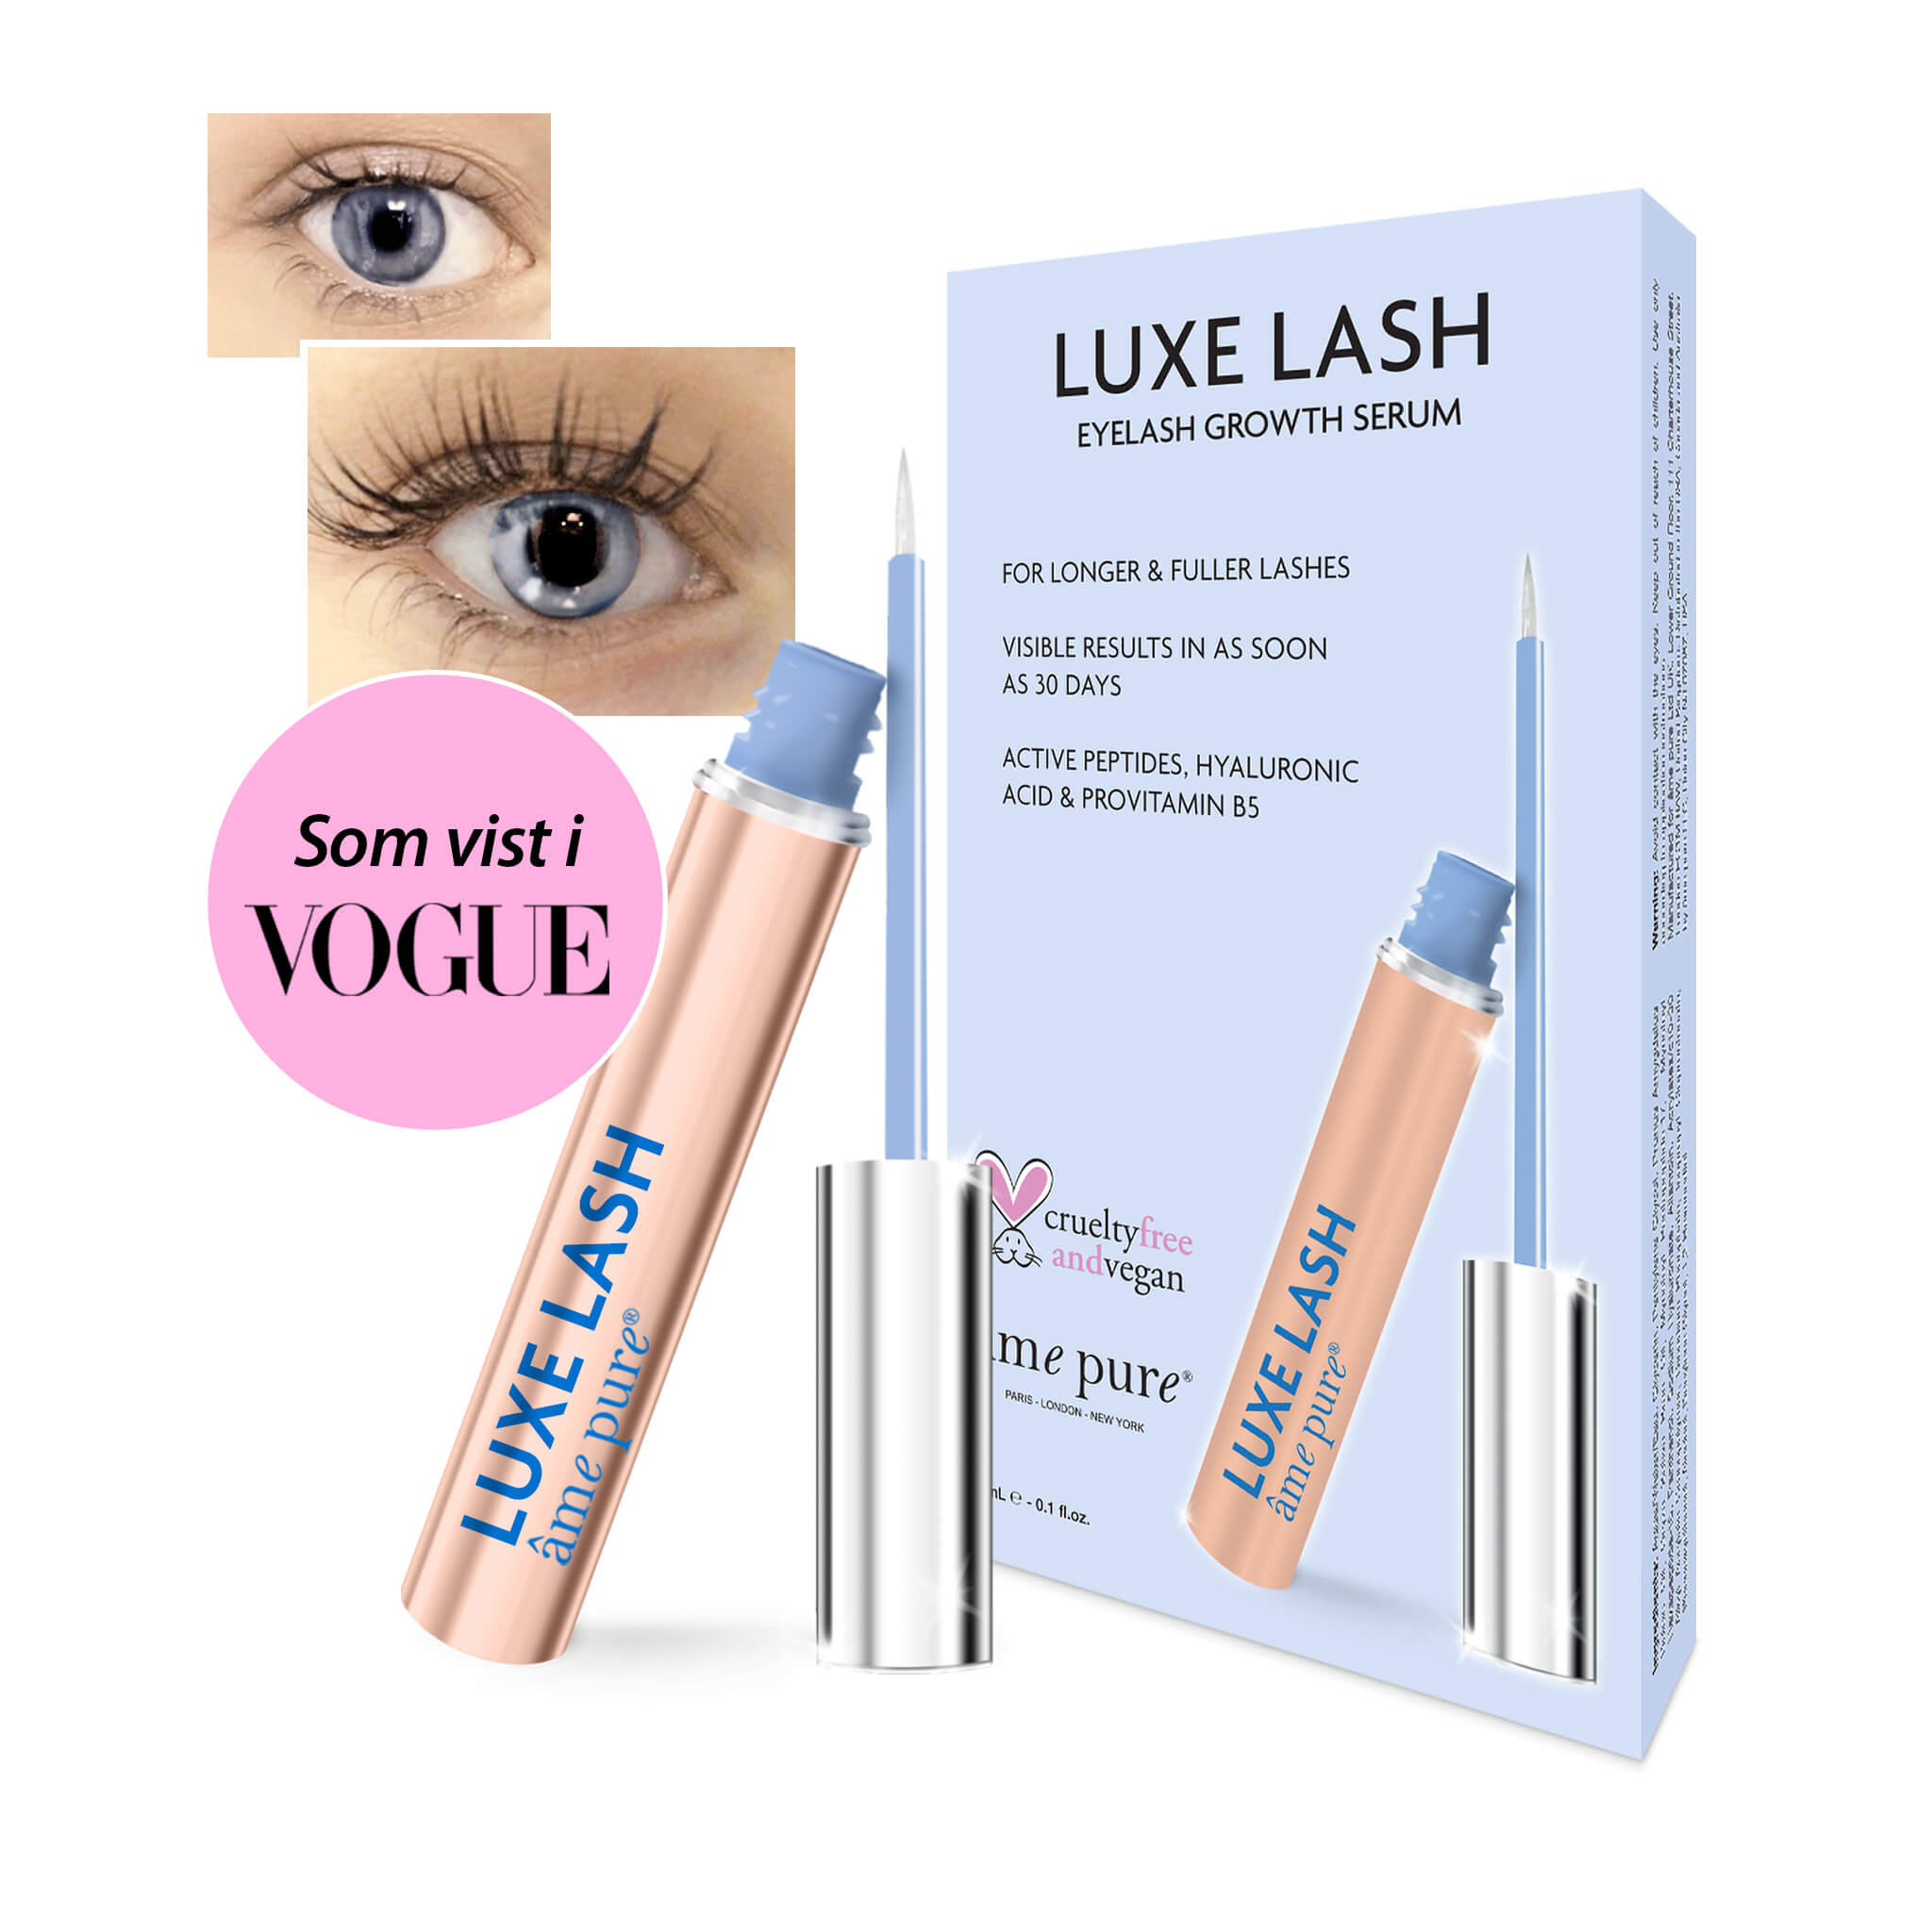 Ame Pure luxe lash vippeserum, lange vipper, øyenvipper, serum vipper, gro lange vipper